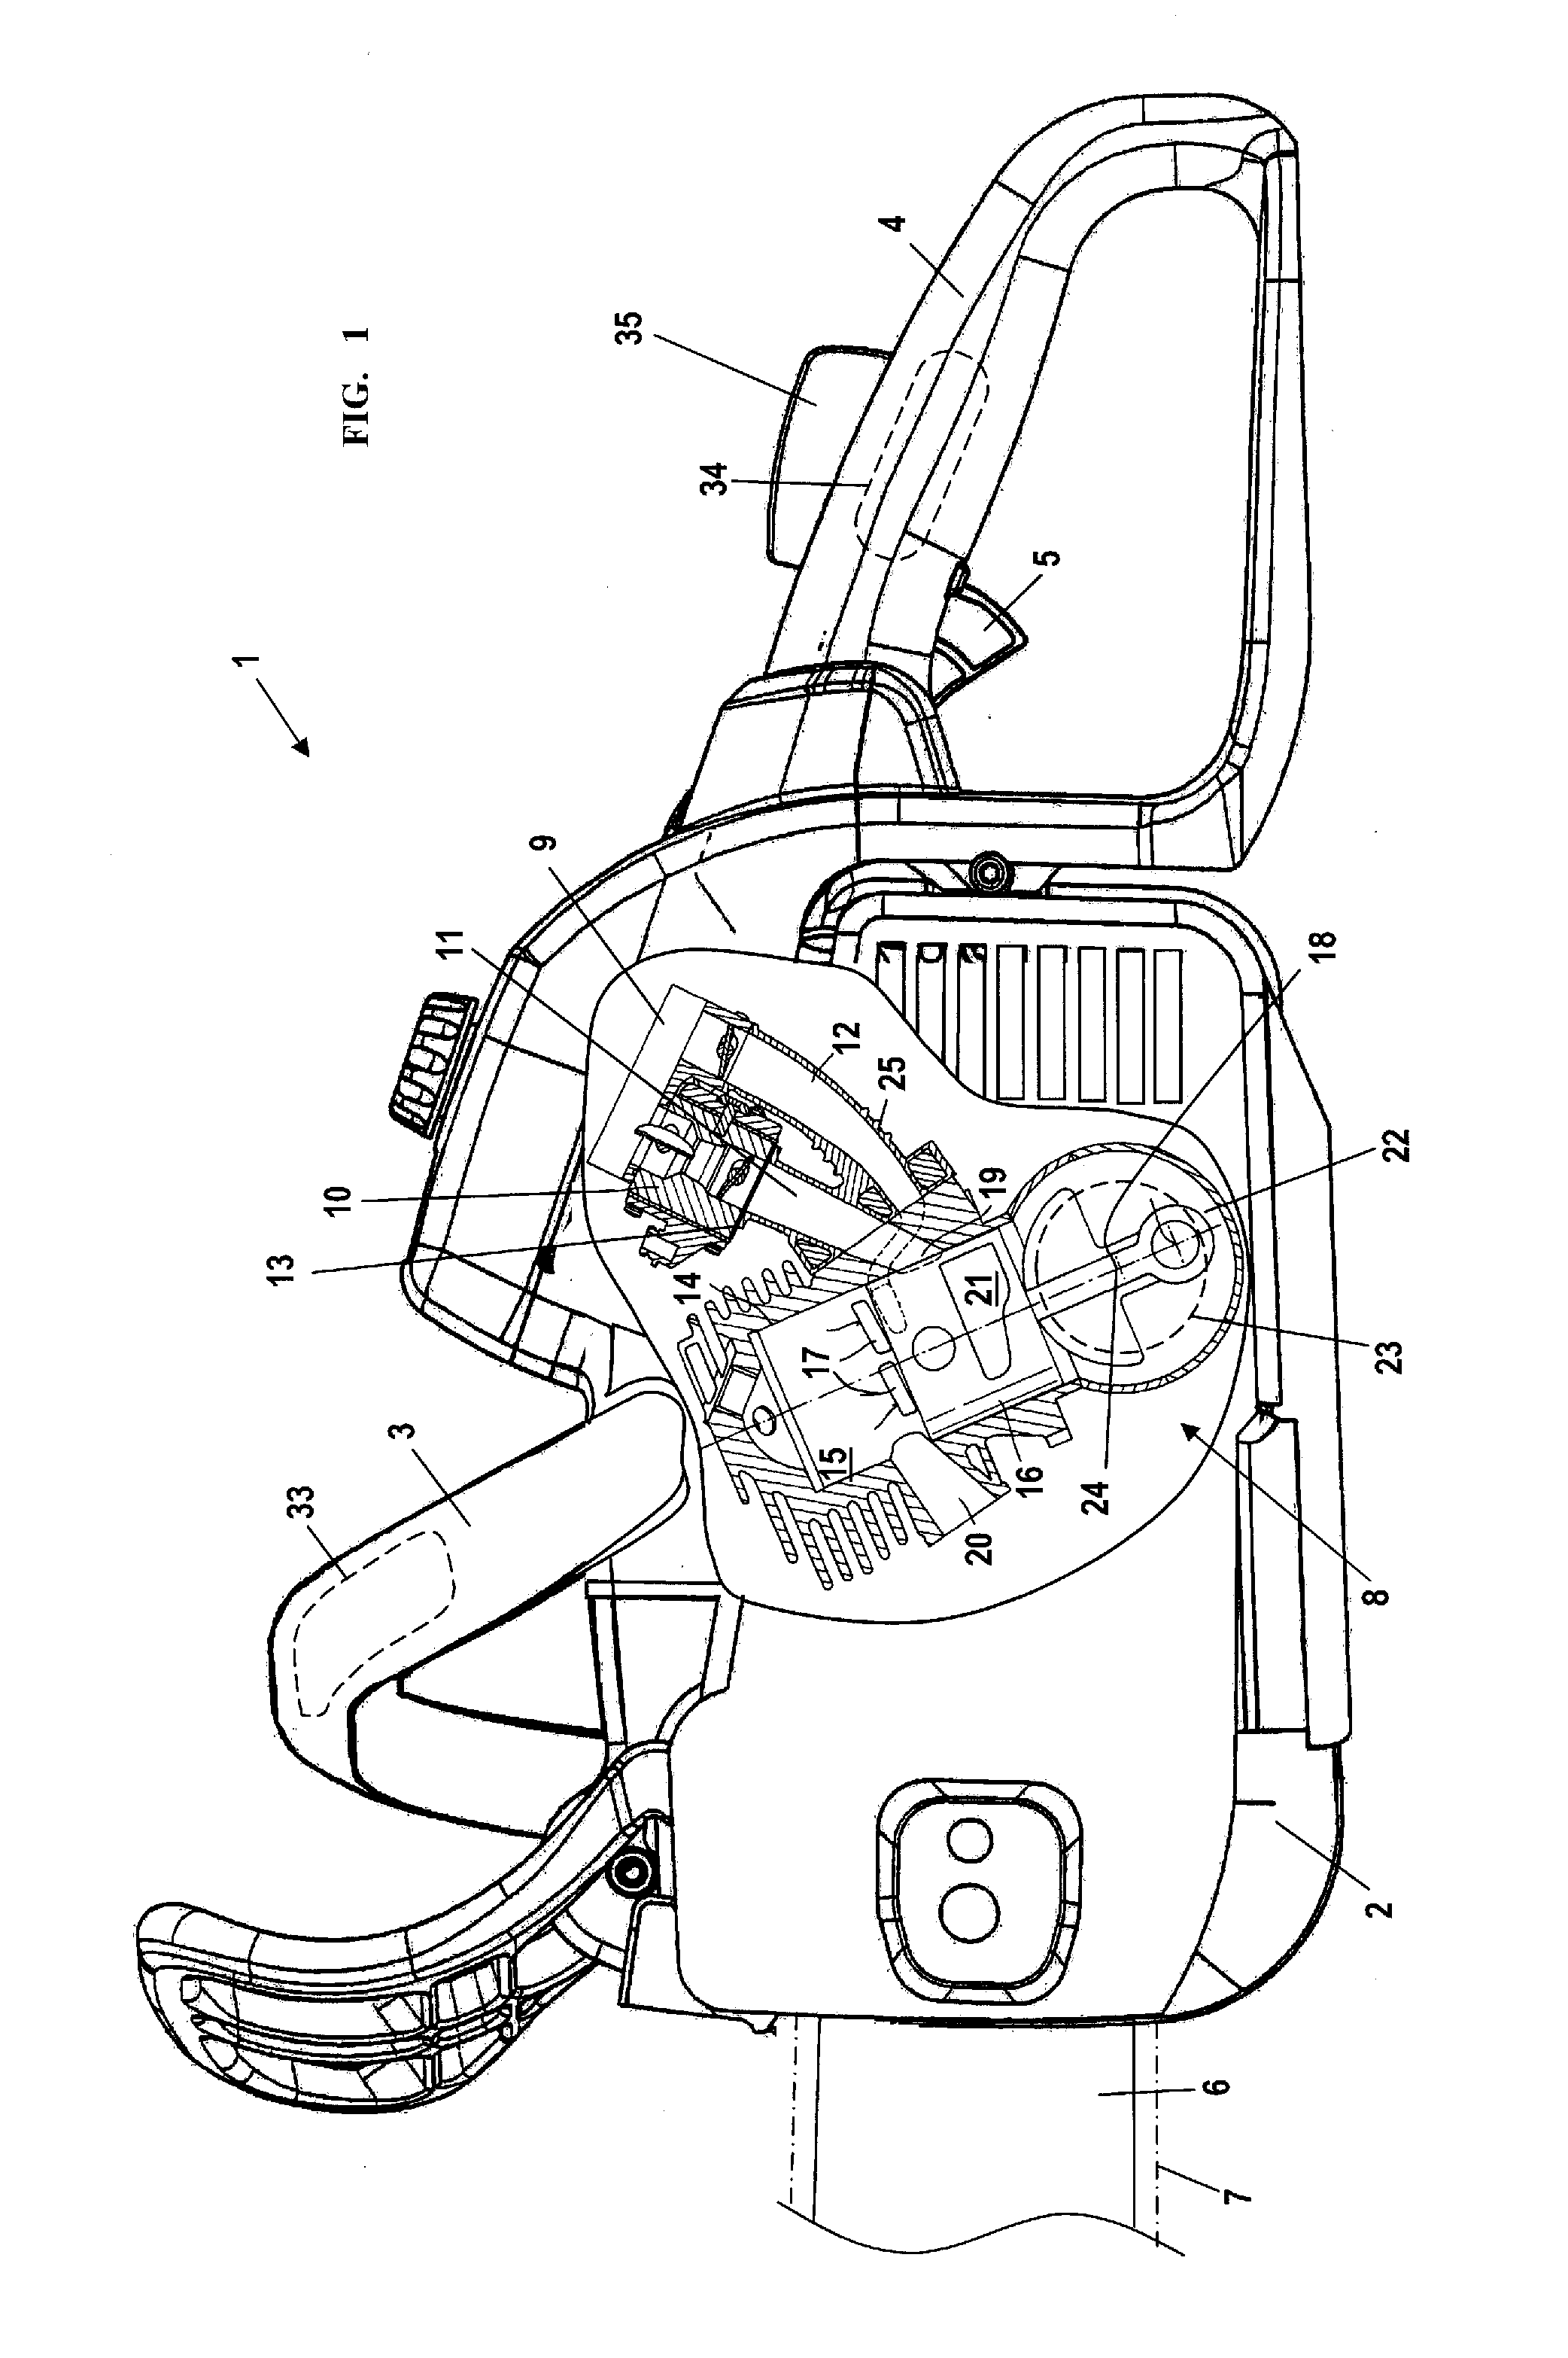 Handheld work apparatus having a control unit for an electric heating element